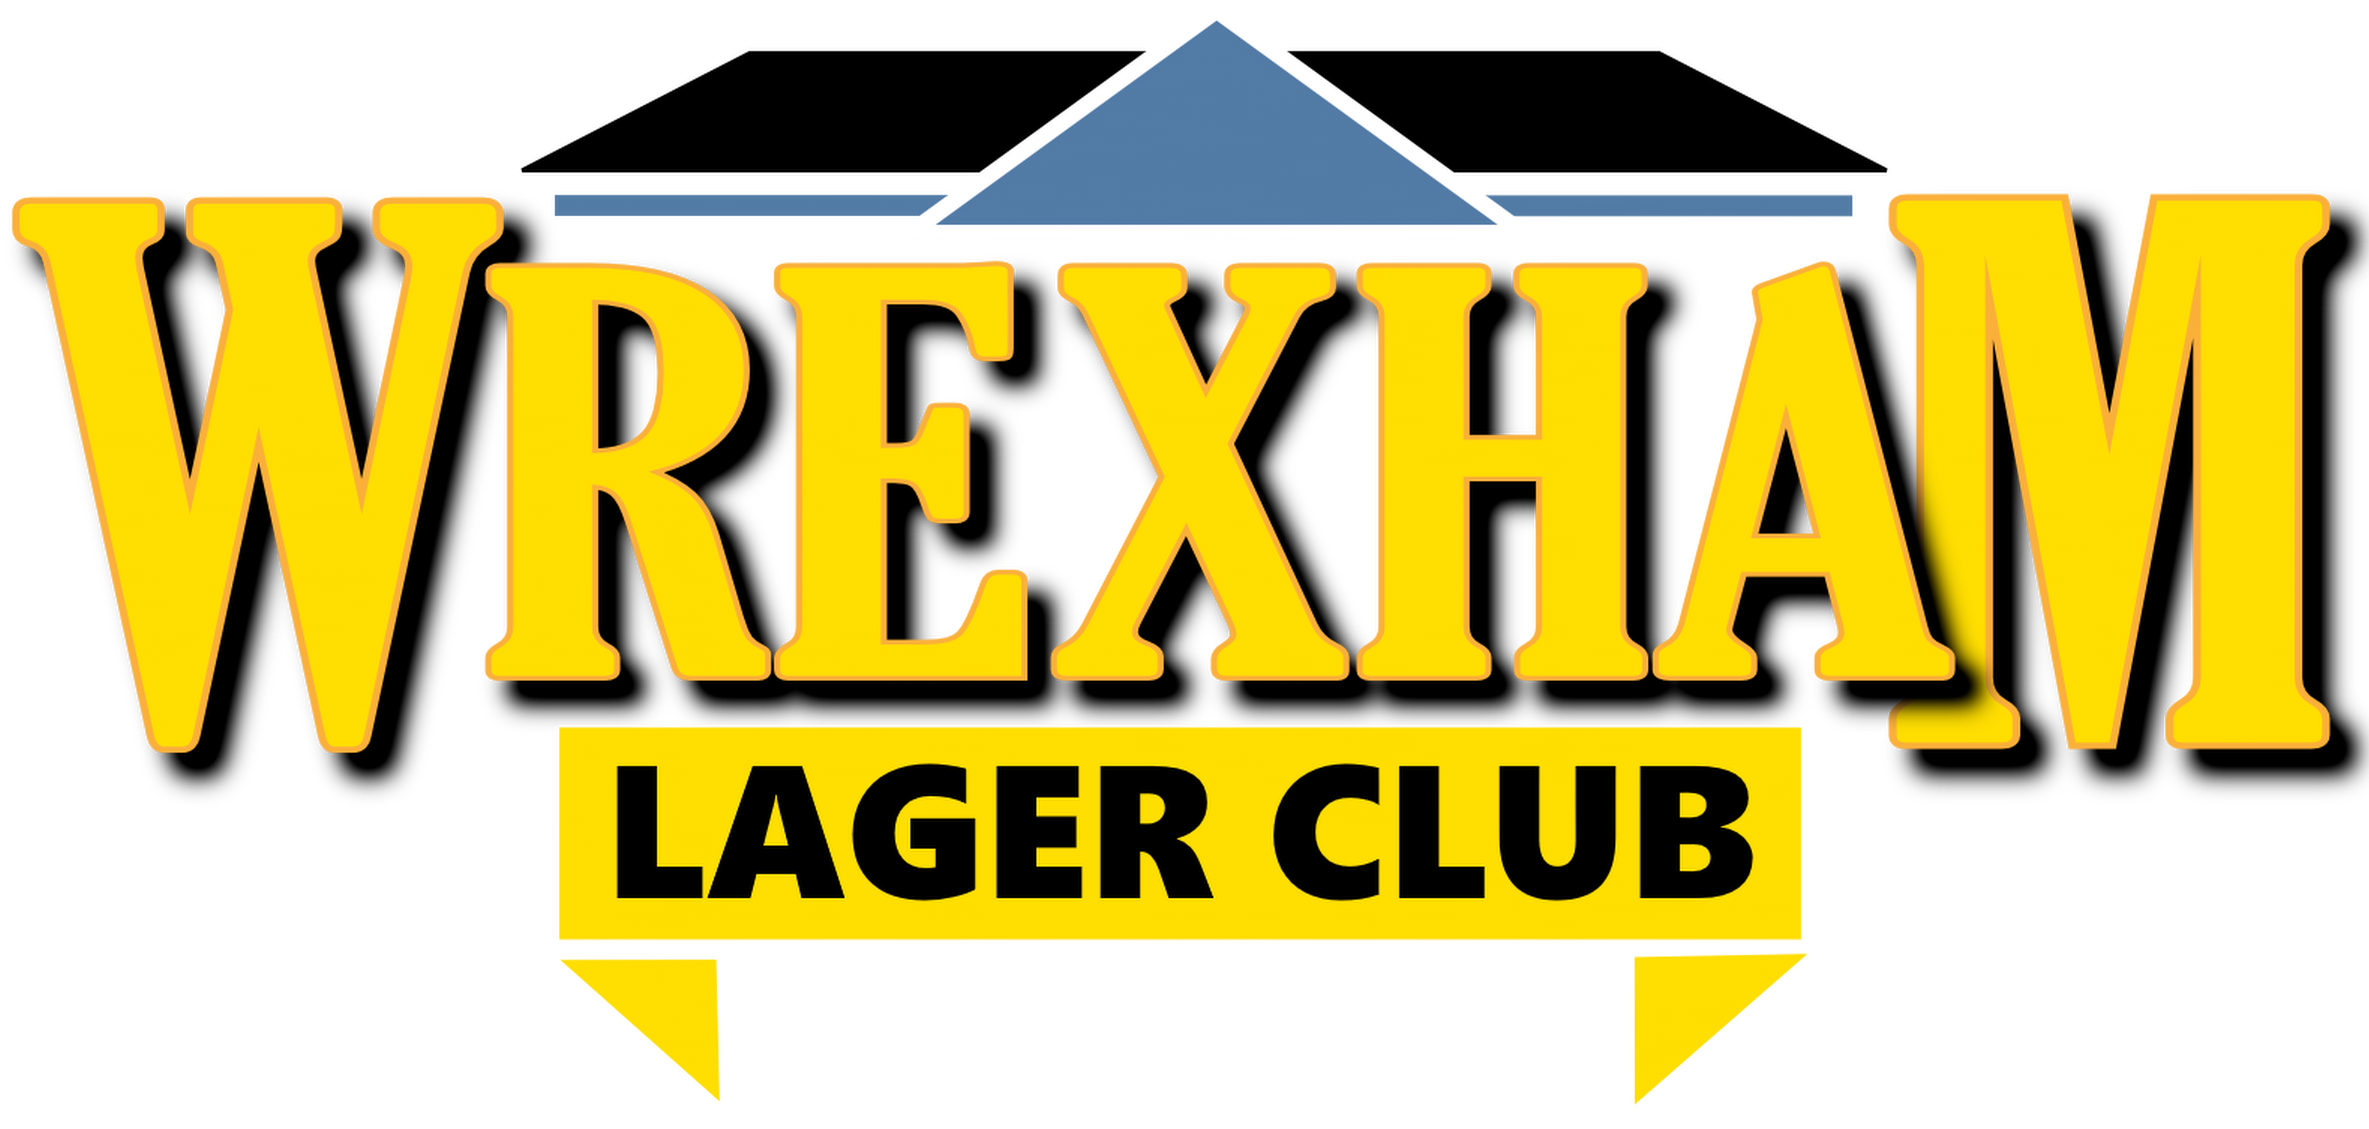 Welcome to Wrexham Lager Club